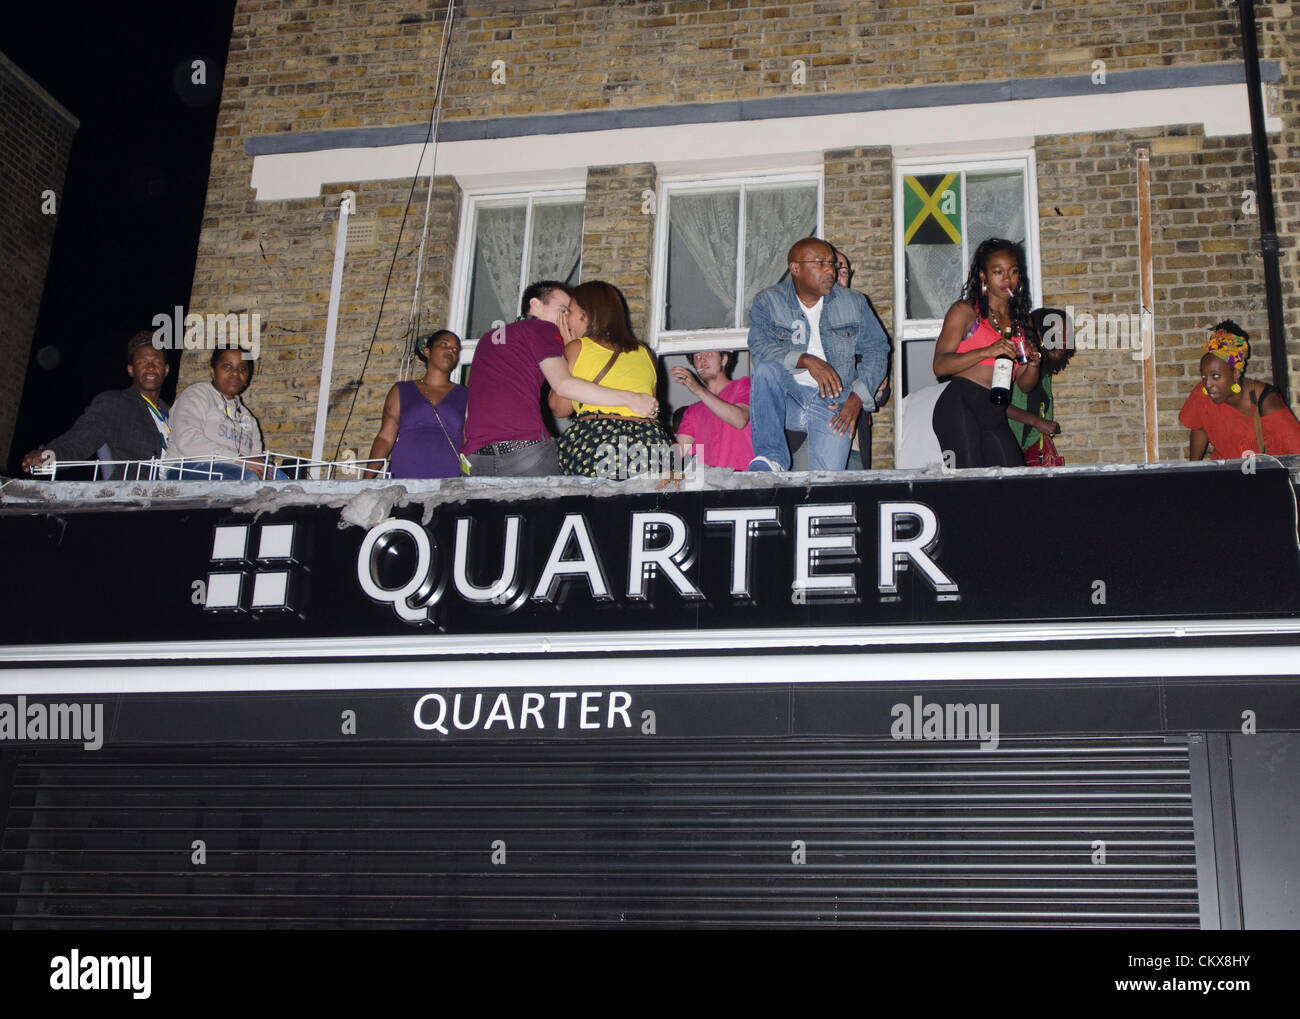 revellers party on balcony above shop Notting Hill Carnival street at night London Uk Quarter Stock Photo